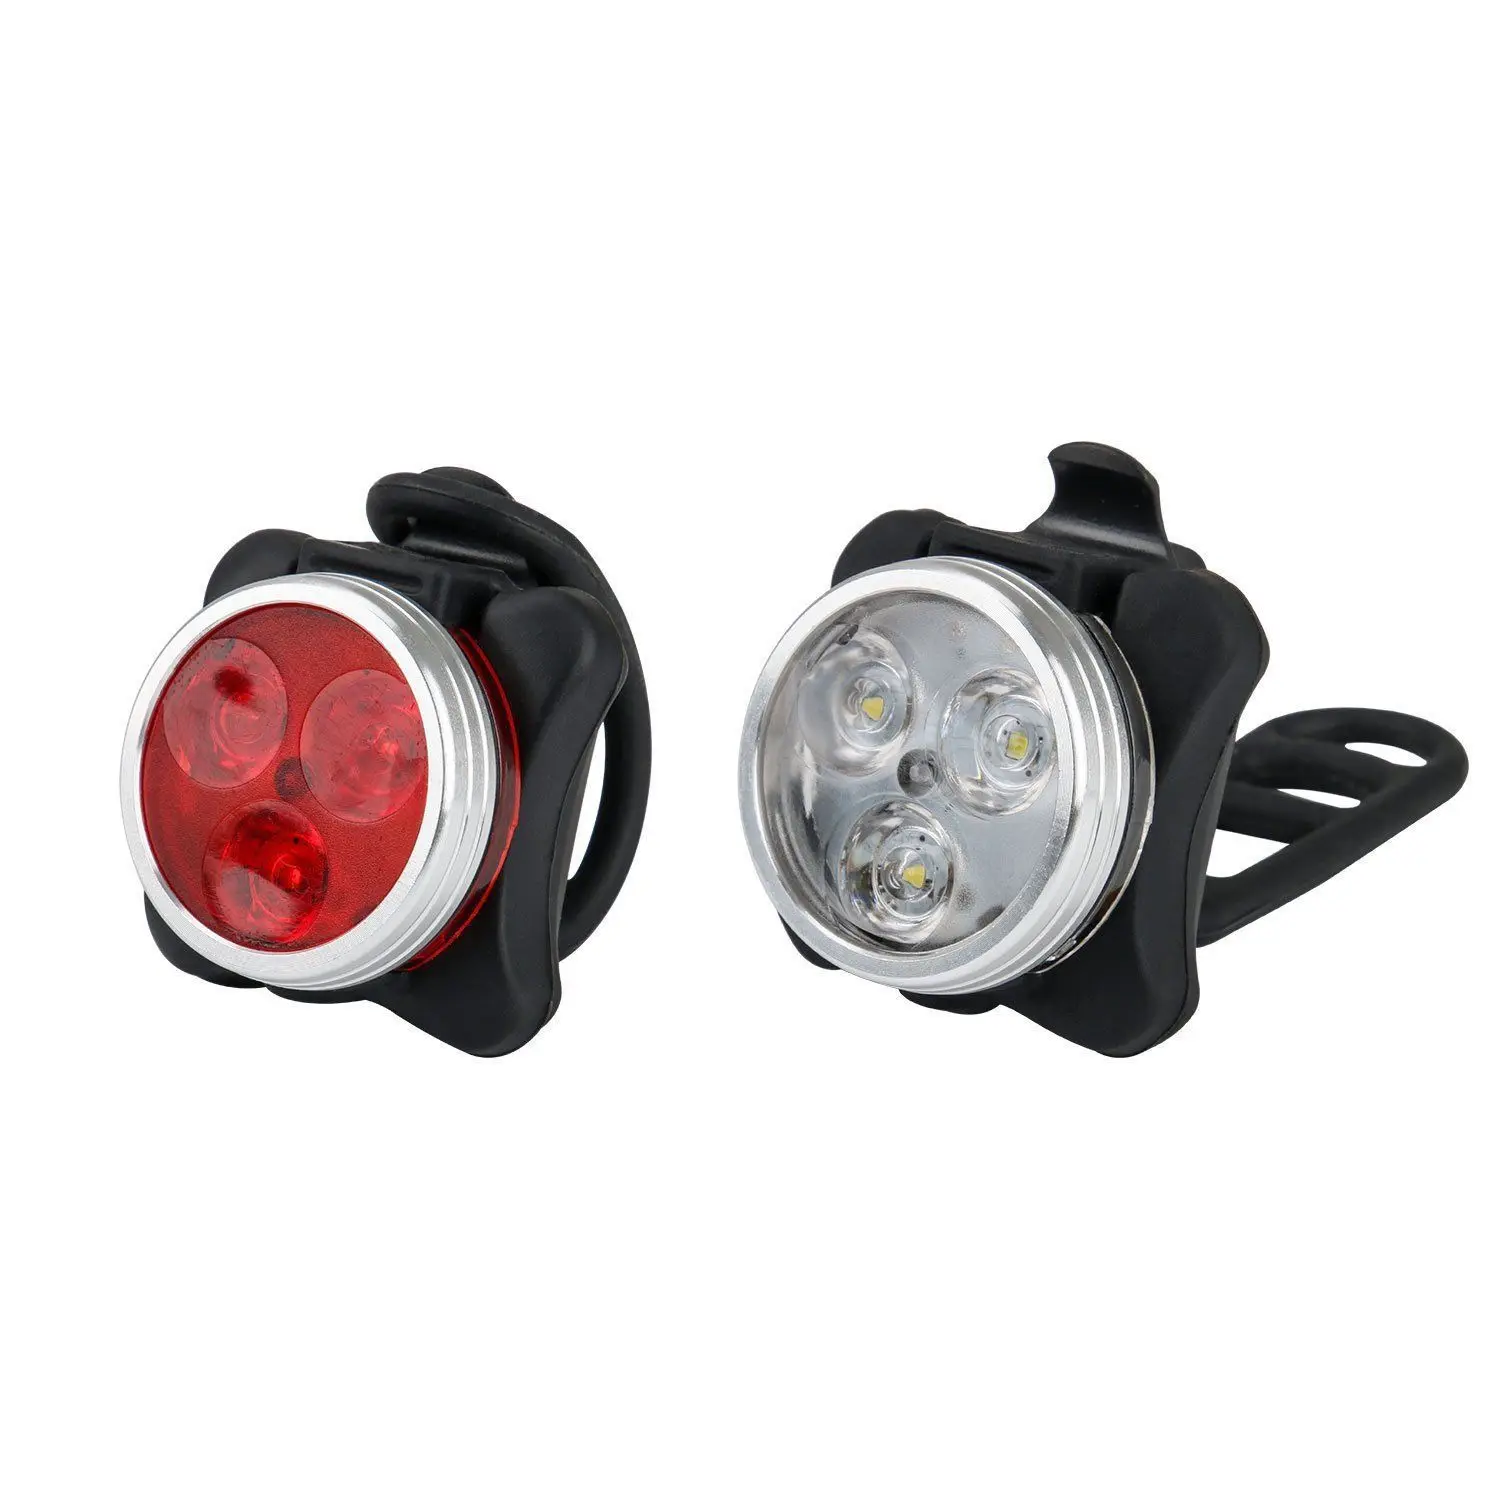 Clearance Built-in Battery USB Rechargeable LED Bicycle Light Bike lamp Cycling Set Bright Front Headlight Rear Back Tail Lanterna 4 Modes 13